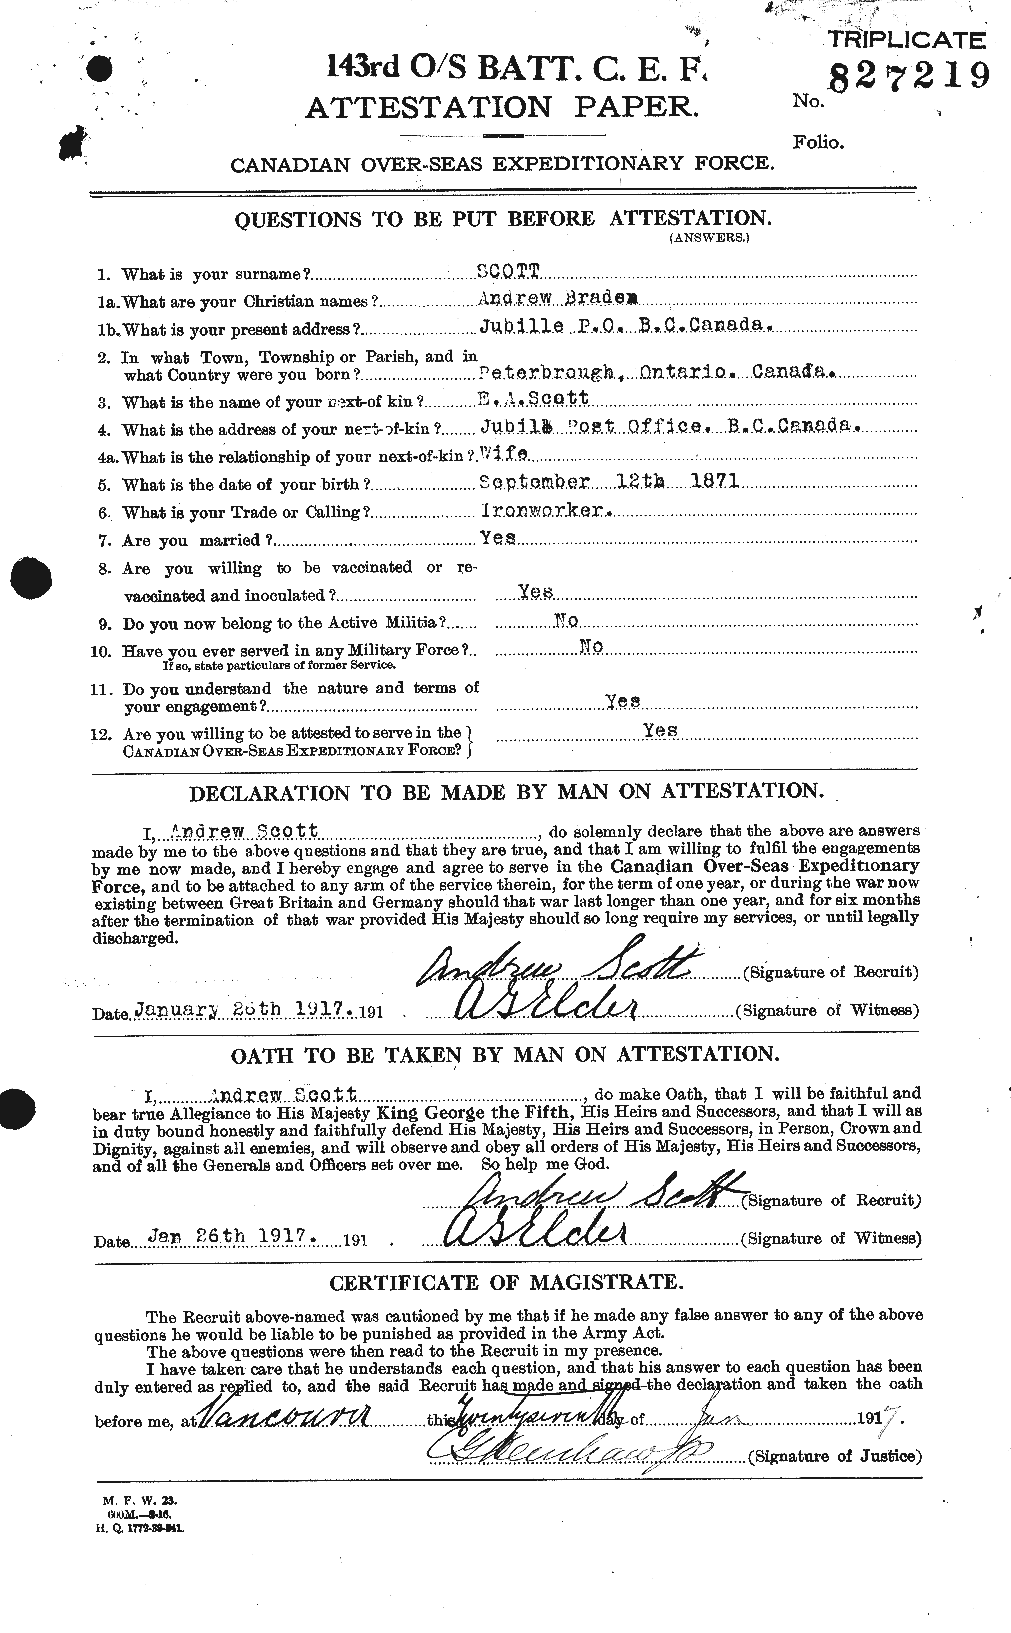 Personnel Records of the First World War - CEF 086444a